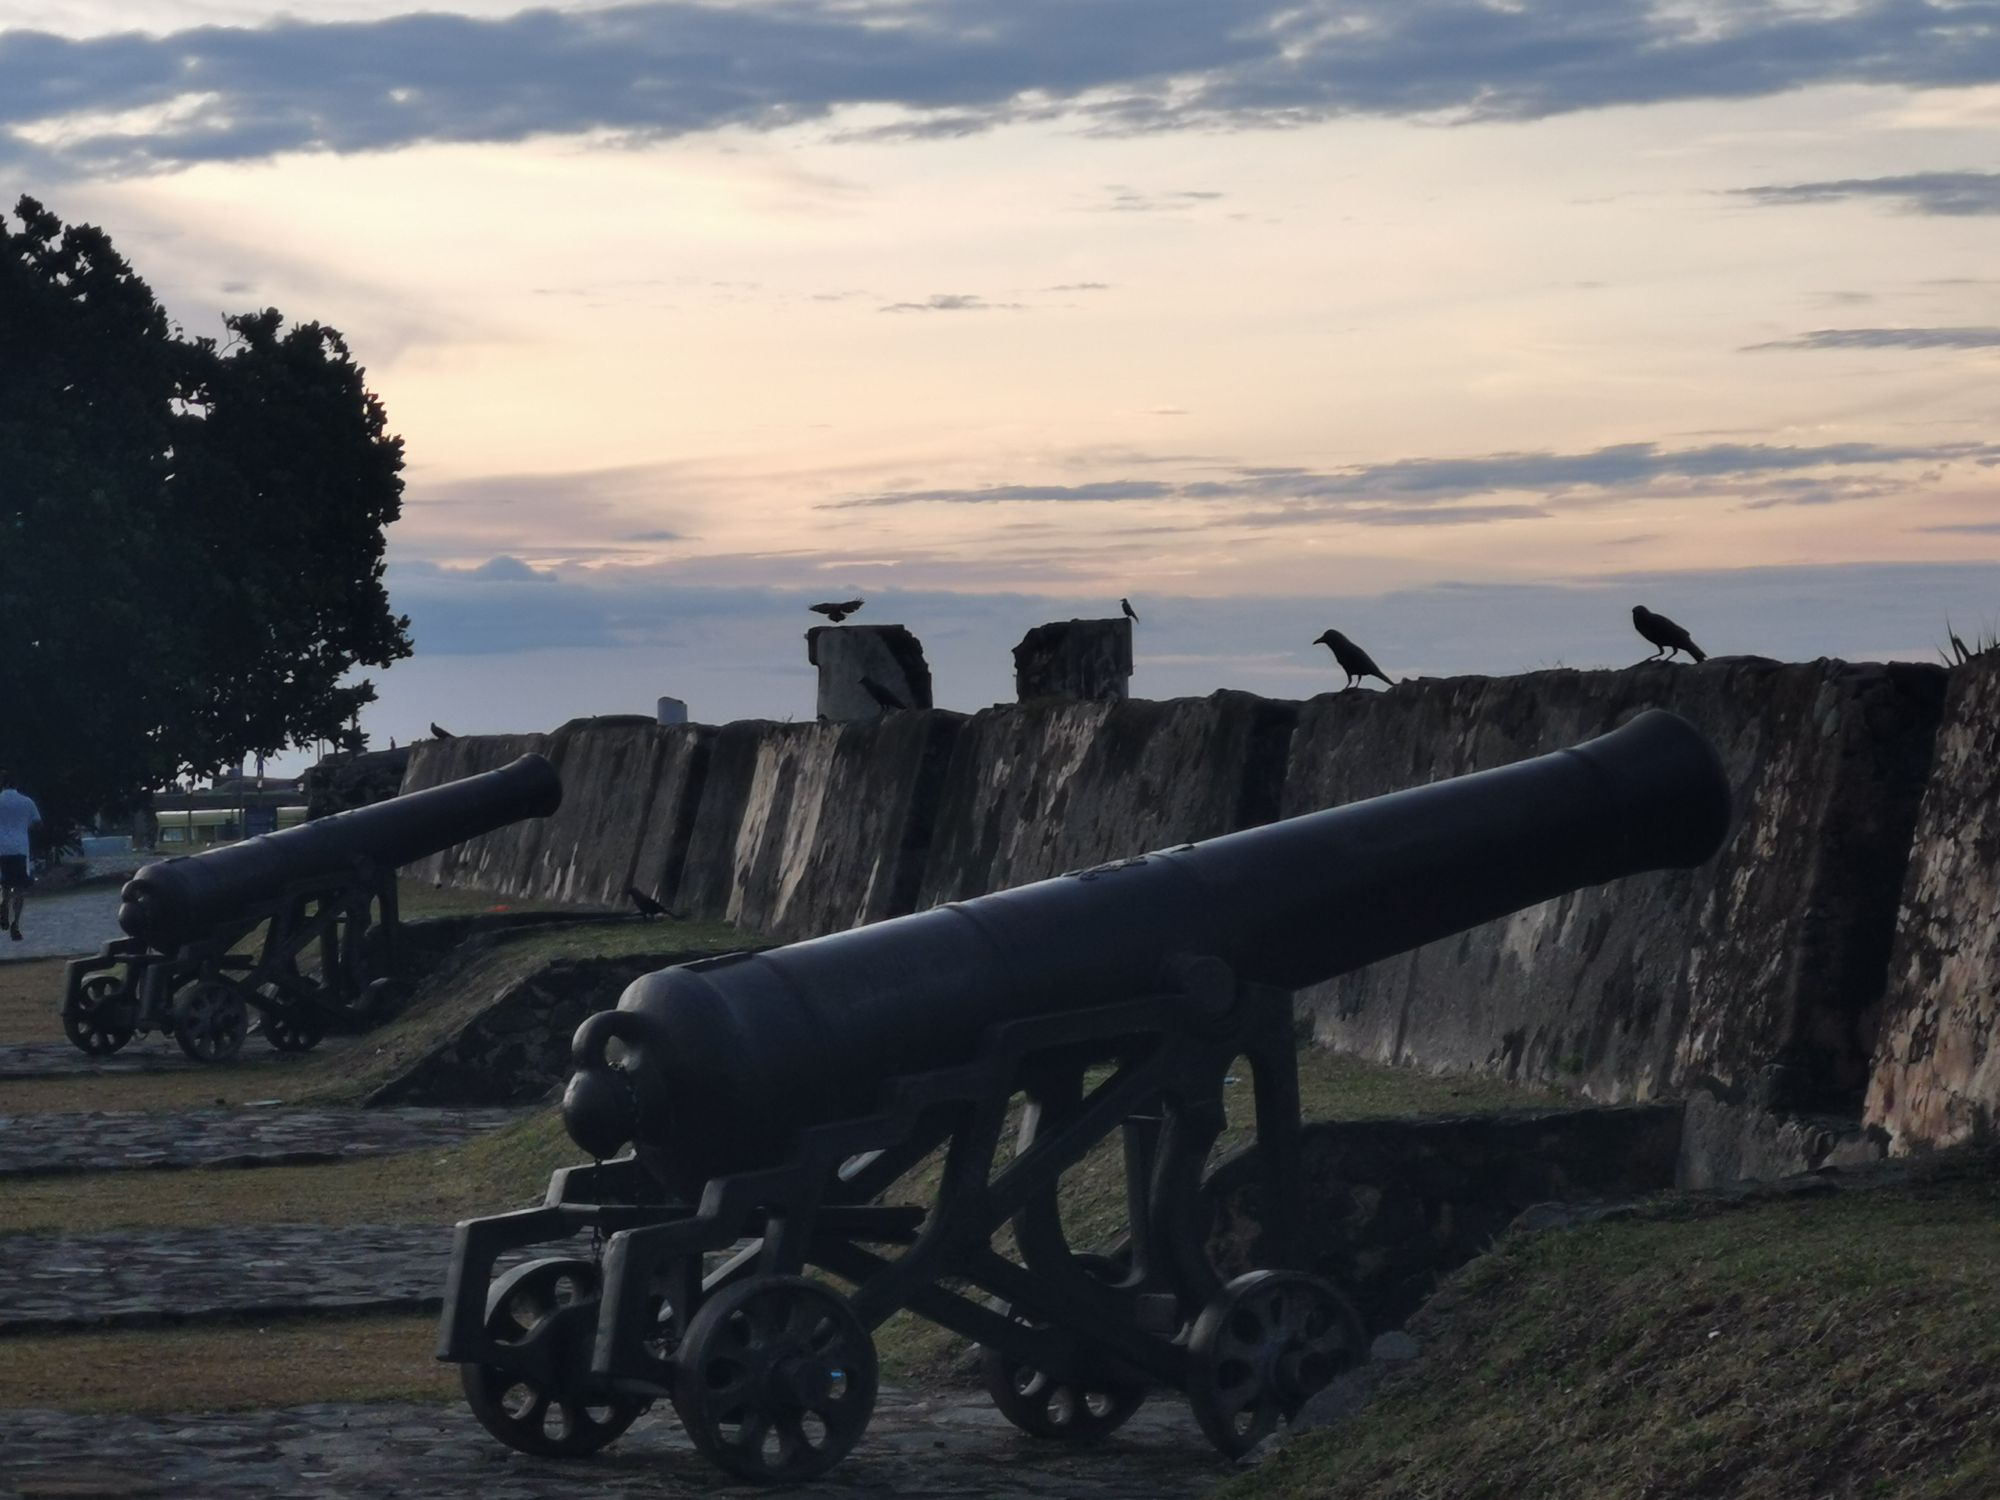 Two canons used by the Dutch during the colonial era in Sri Lanka, now seen in display in the Galle Fort, Sri Lanka.